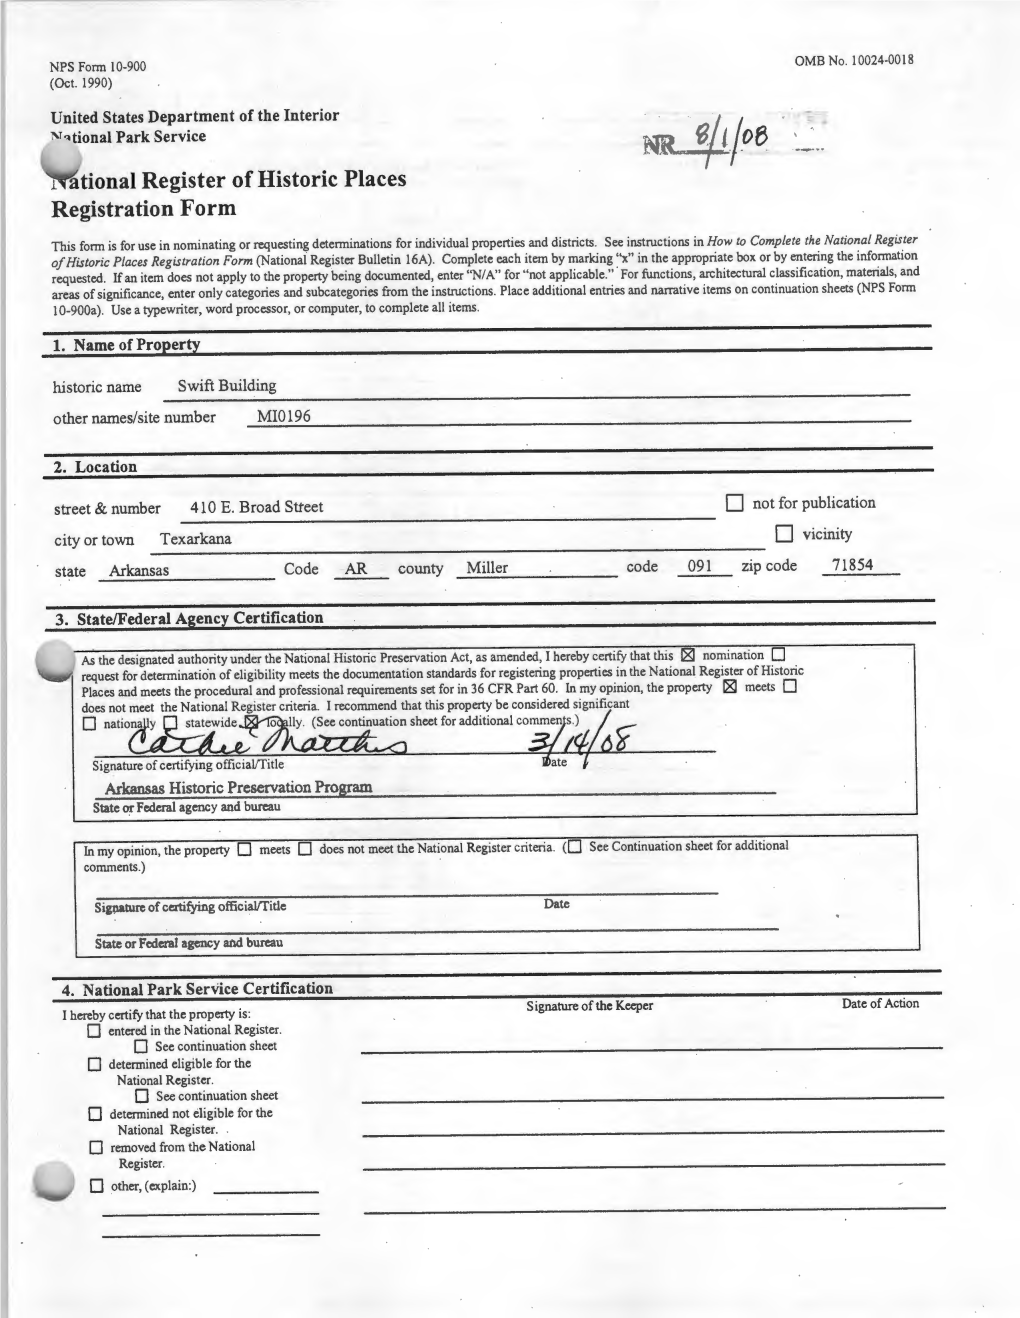 1 Ational Register of Historic Places Registration Form